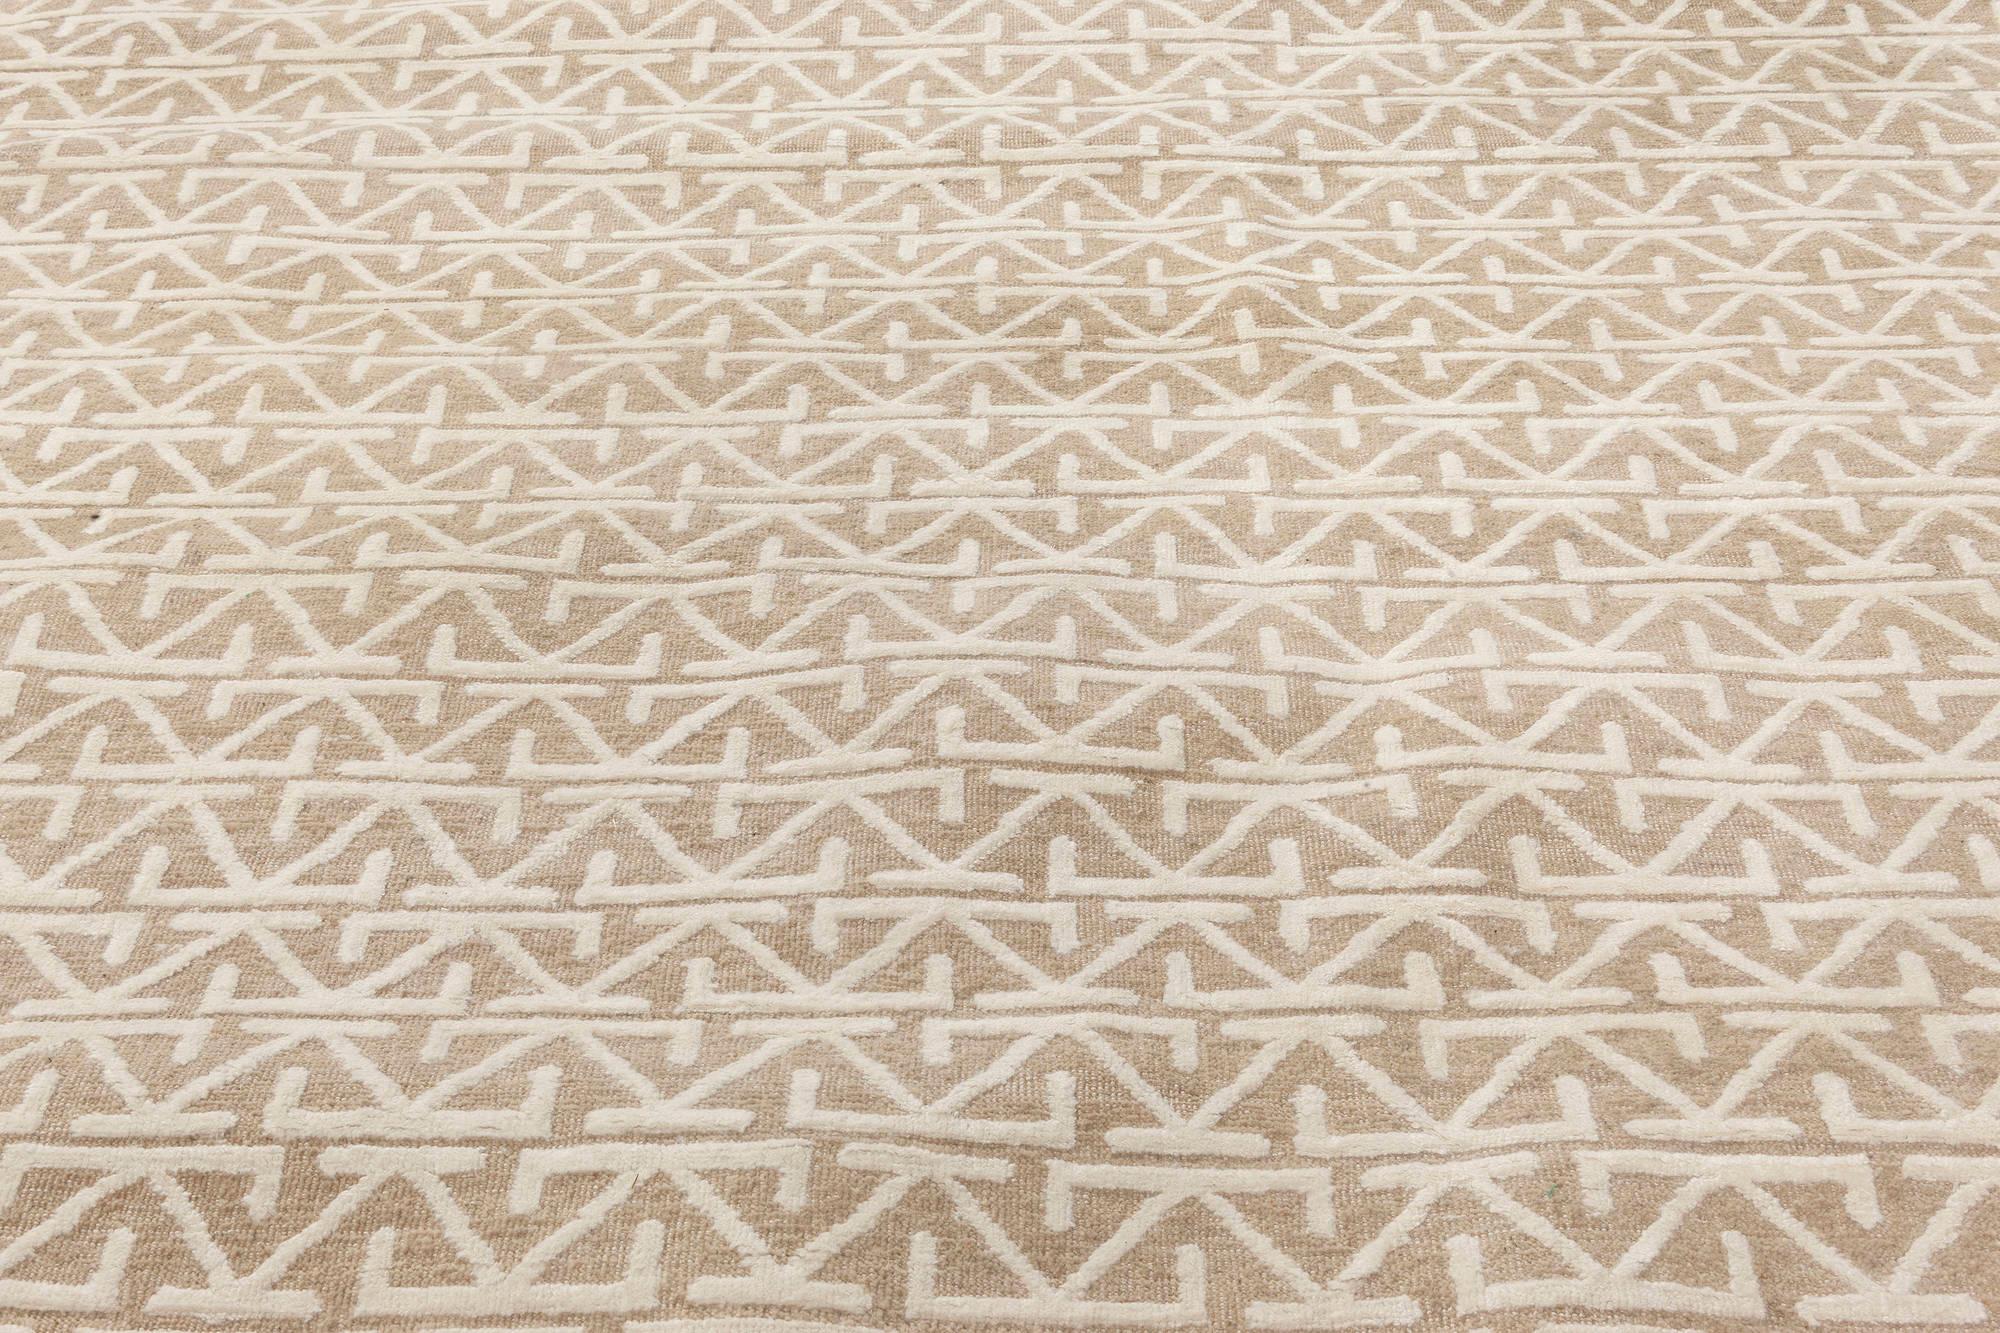 Indian Contemporary Oriental Inspired Beige and White Rug by Doris Leslie Blau For Sale